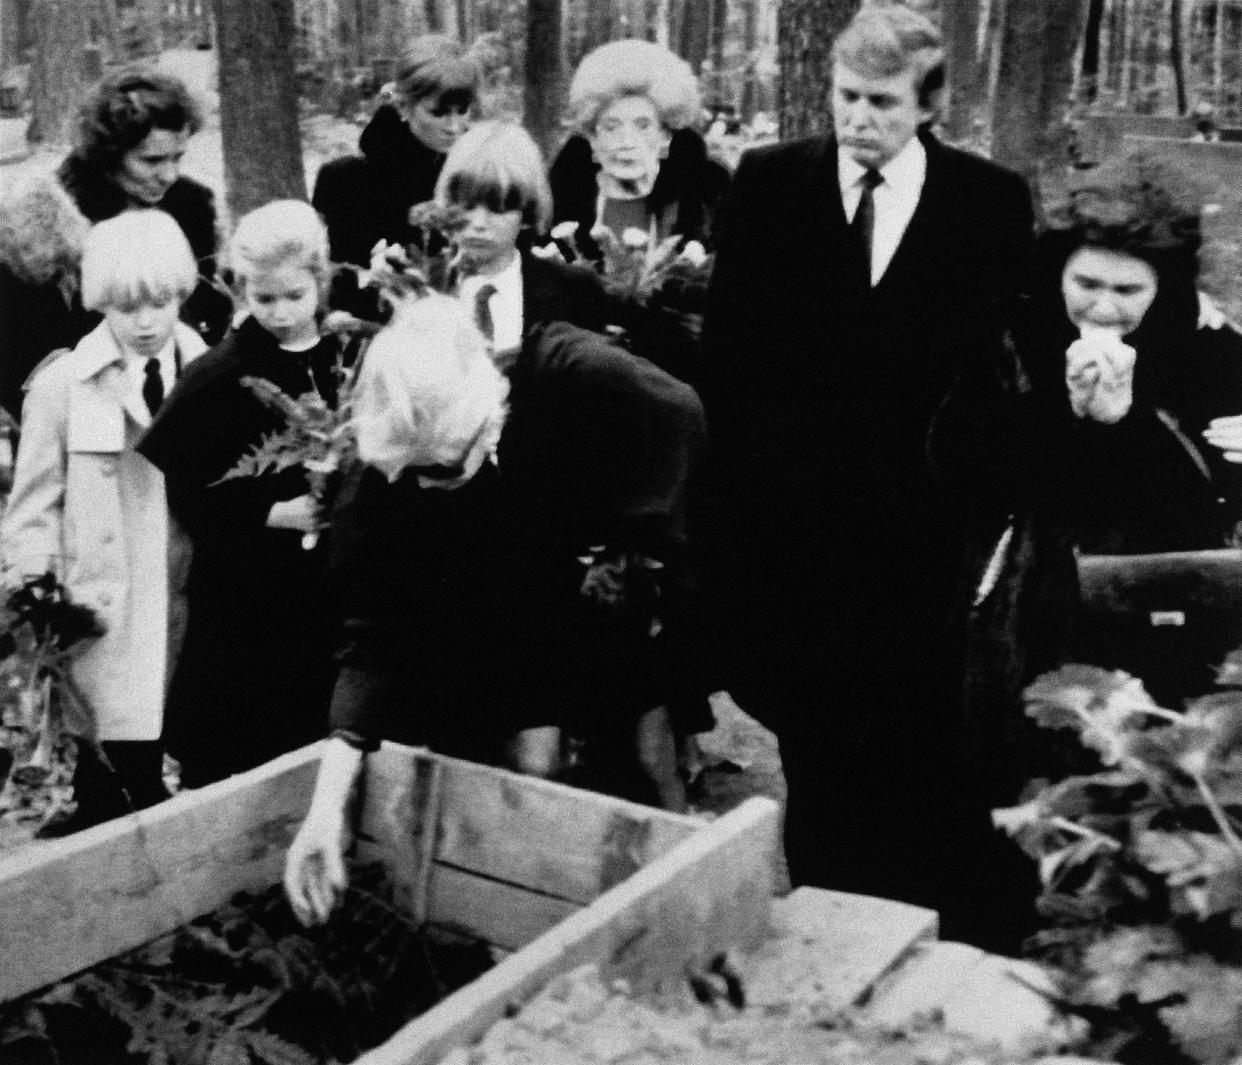 The funeral of Ivana Trump's father Milos Zelnicek in the Moravian town of Zlin, is pictured Oct. 1990. From left: Trump's children, Eric, 6, Ivanka, 8 and Donald, 12, Ivana and Donald Trump, and Marie Francová Zelnícek,, Ivana's mother.